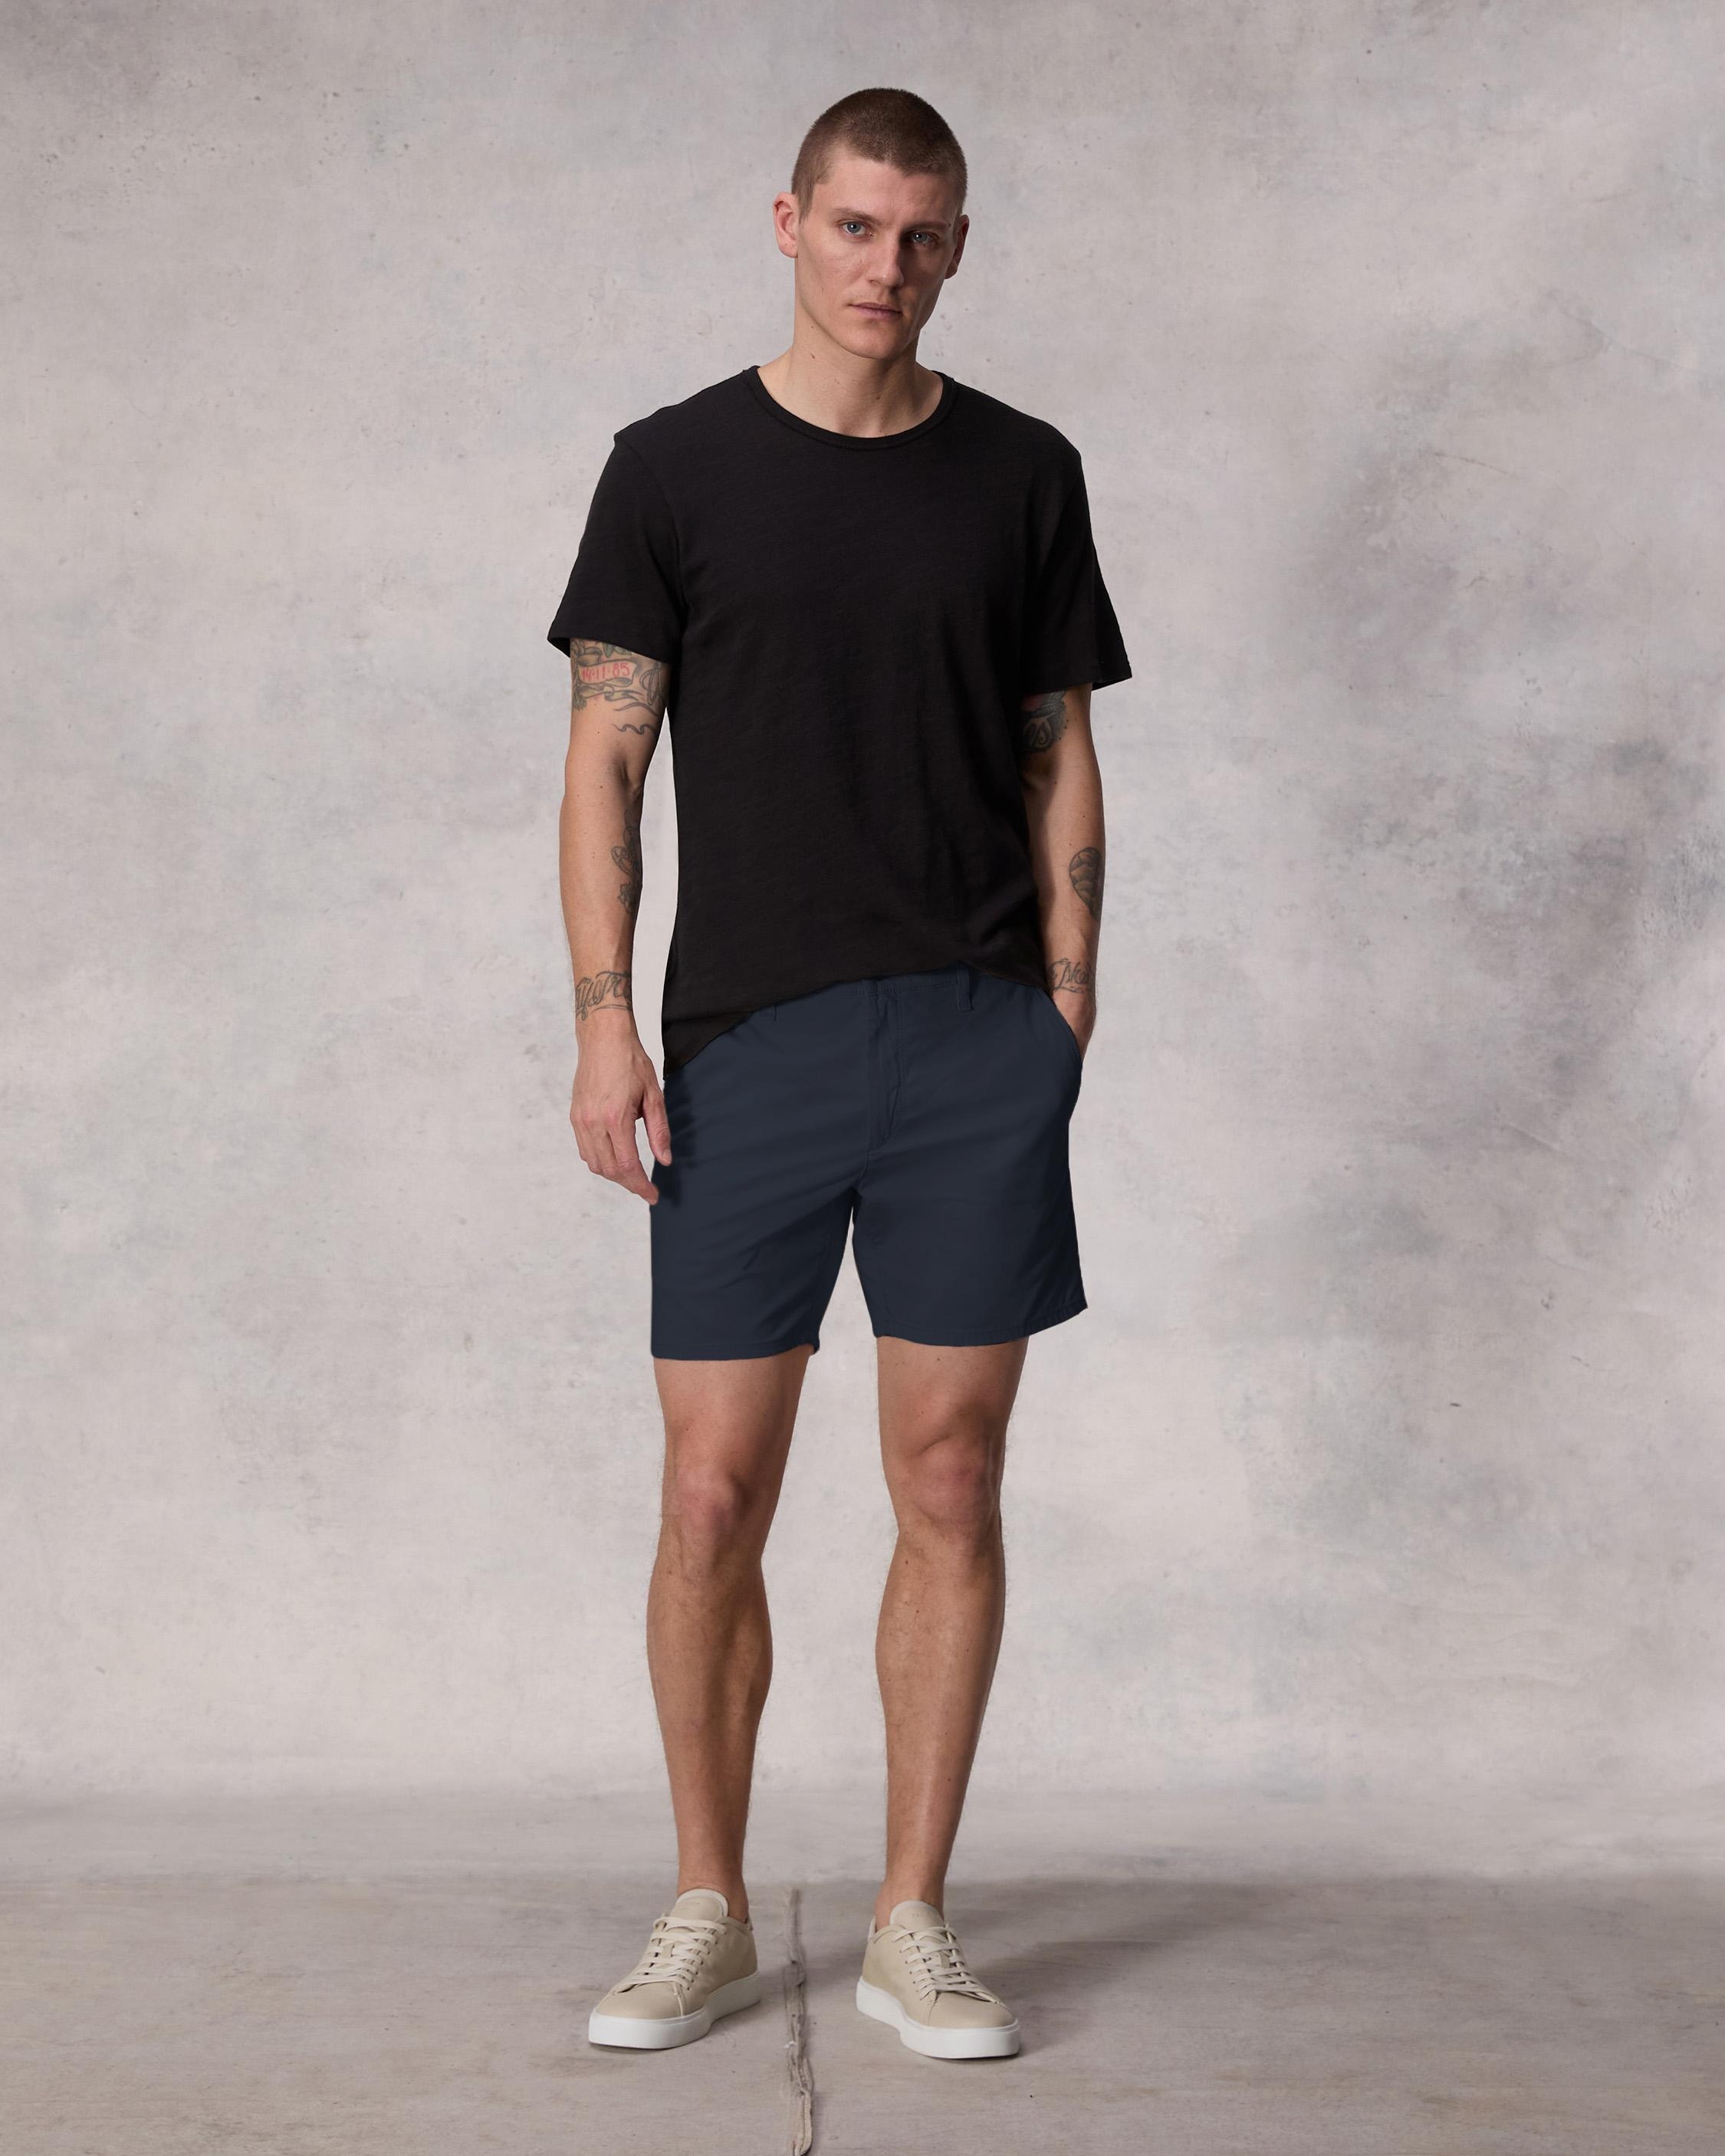 Standard Cotton Chino Short
Classic Fit - 2